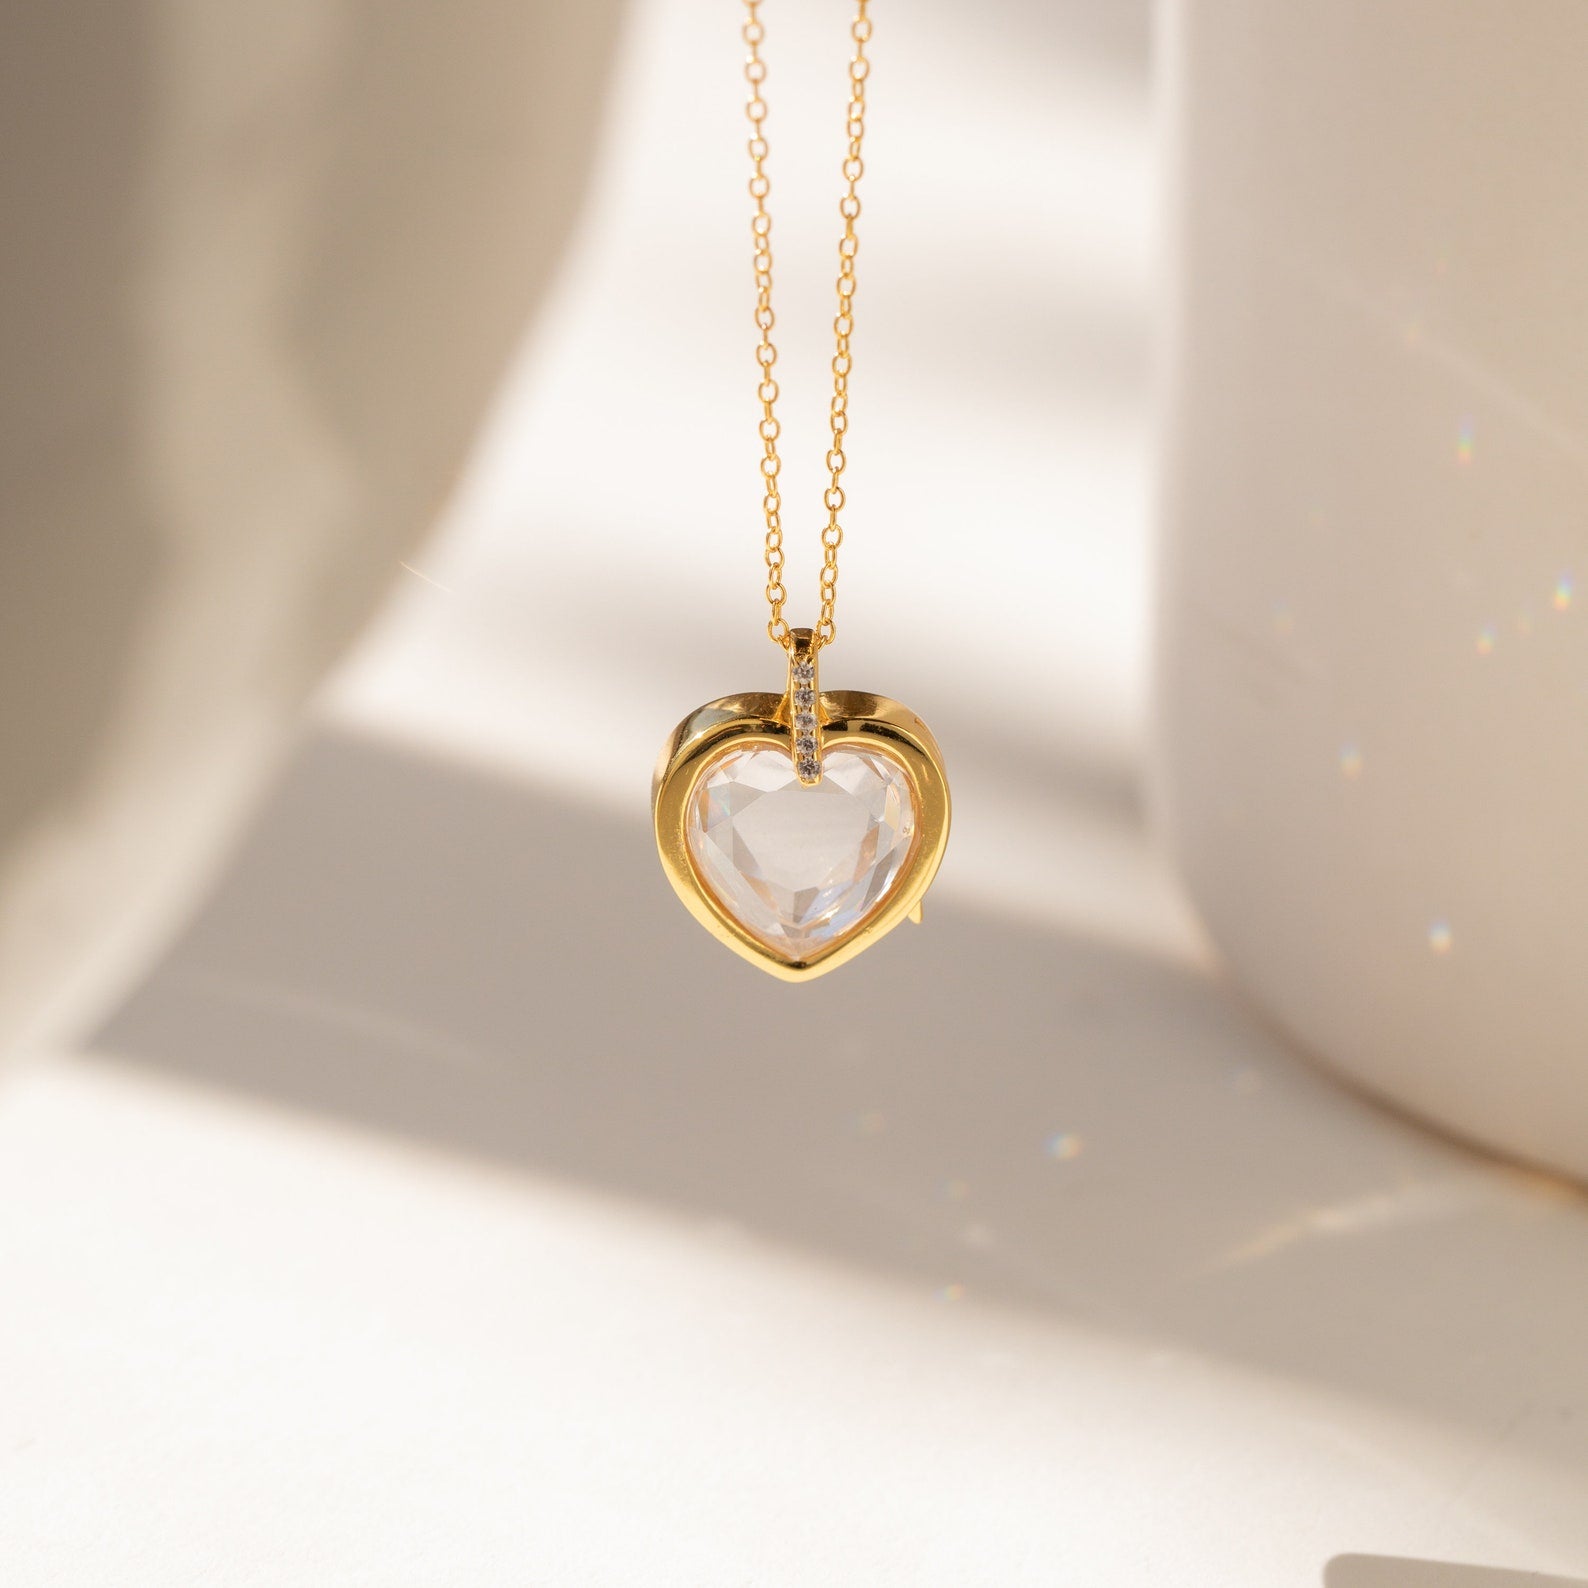 Endless Love Photo Locket Necklaces | Caitlyn Minimalist Sterling Silver / Heart